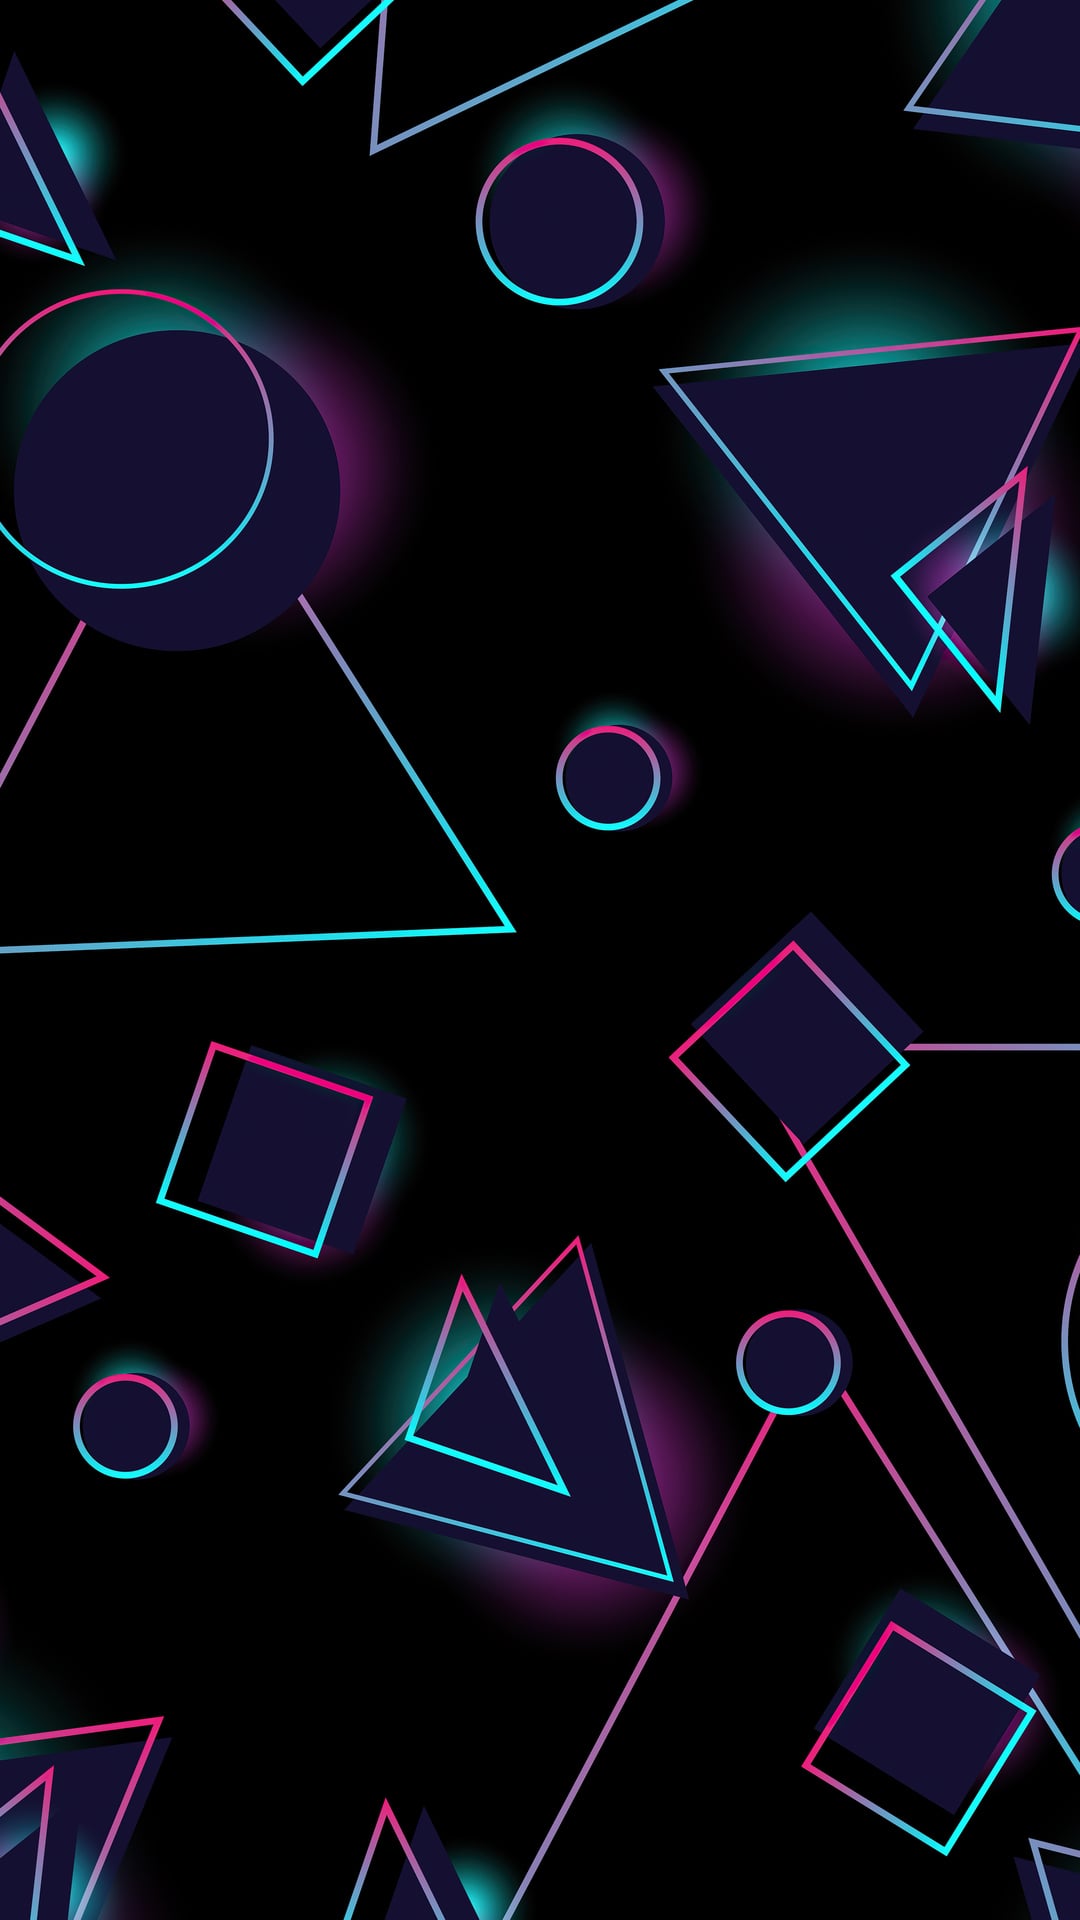 Neon Circles And TriangleK wallpaper, free and easy to download